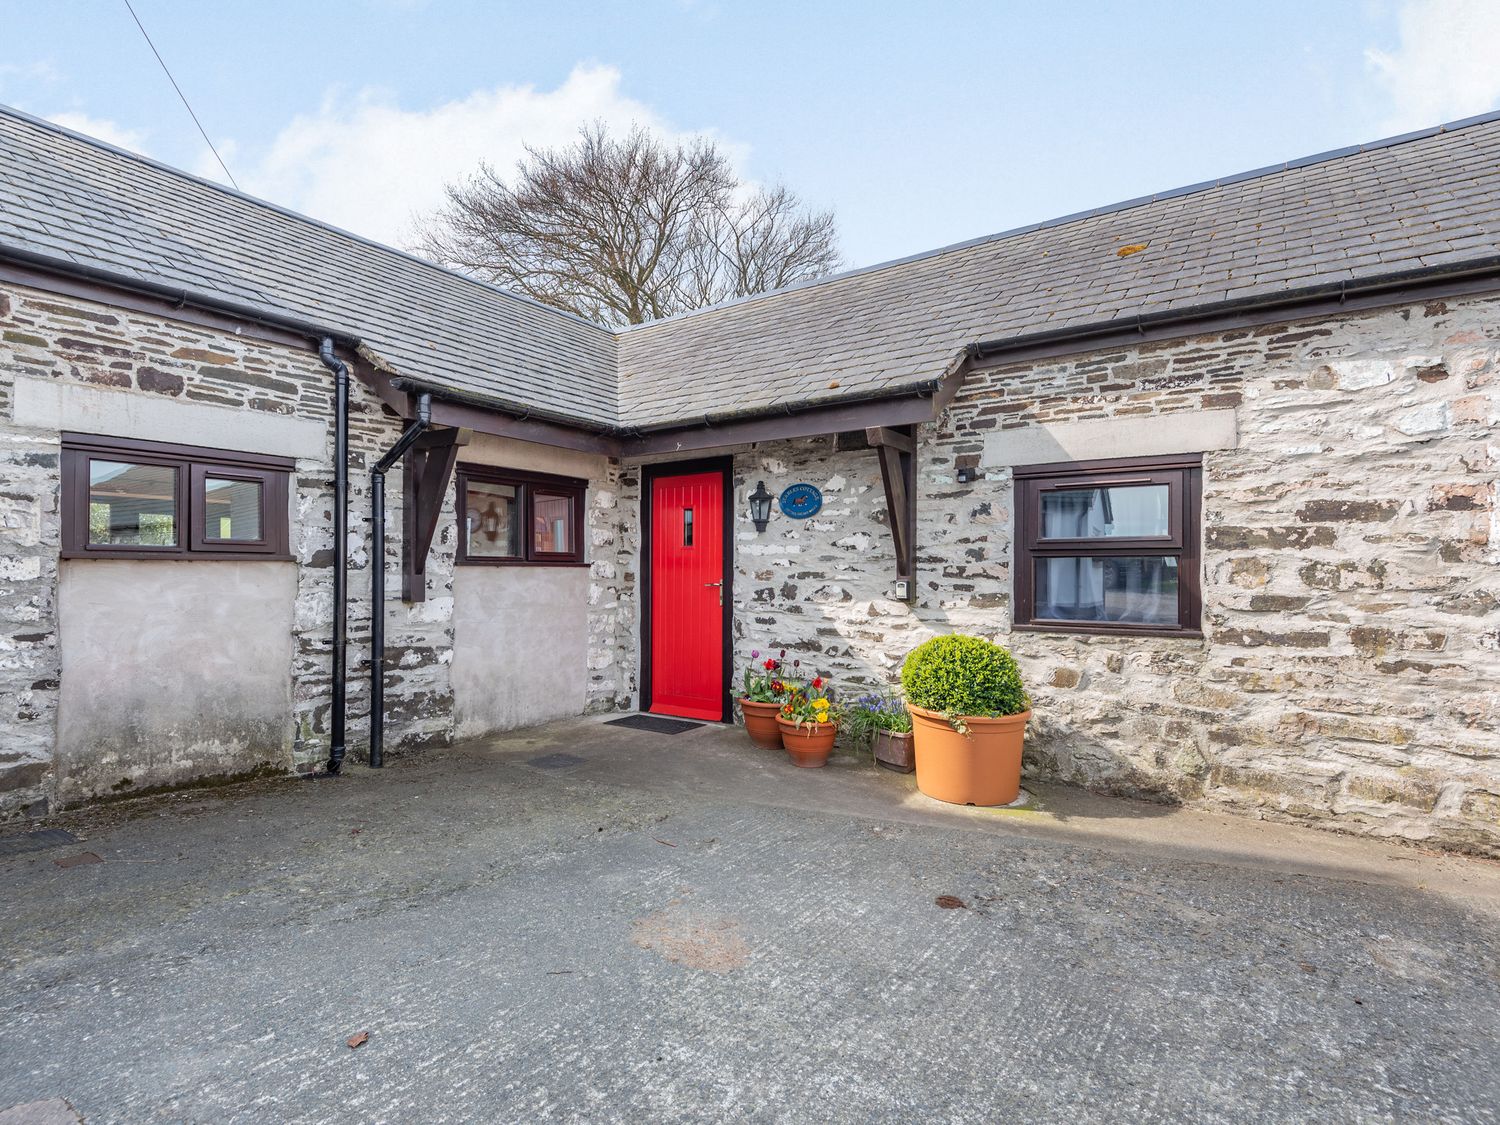 Stables Cottage - North Wales - 18548 - photo 1